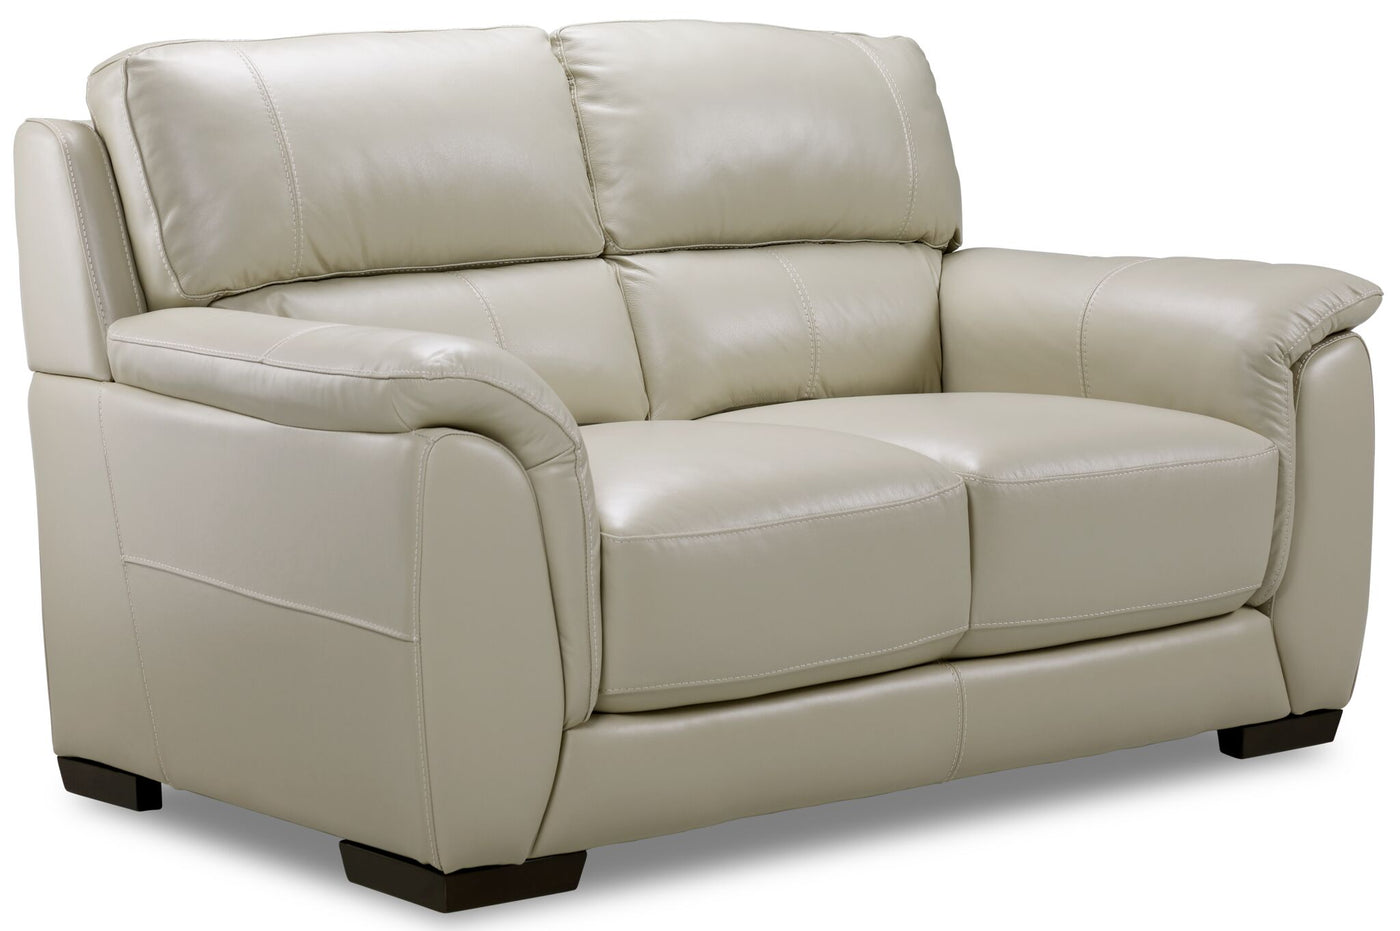 Avalon Leather Sofa, Loveseat and Chair Set - Oyster Grey Cream